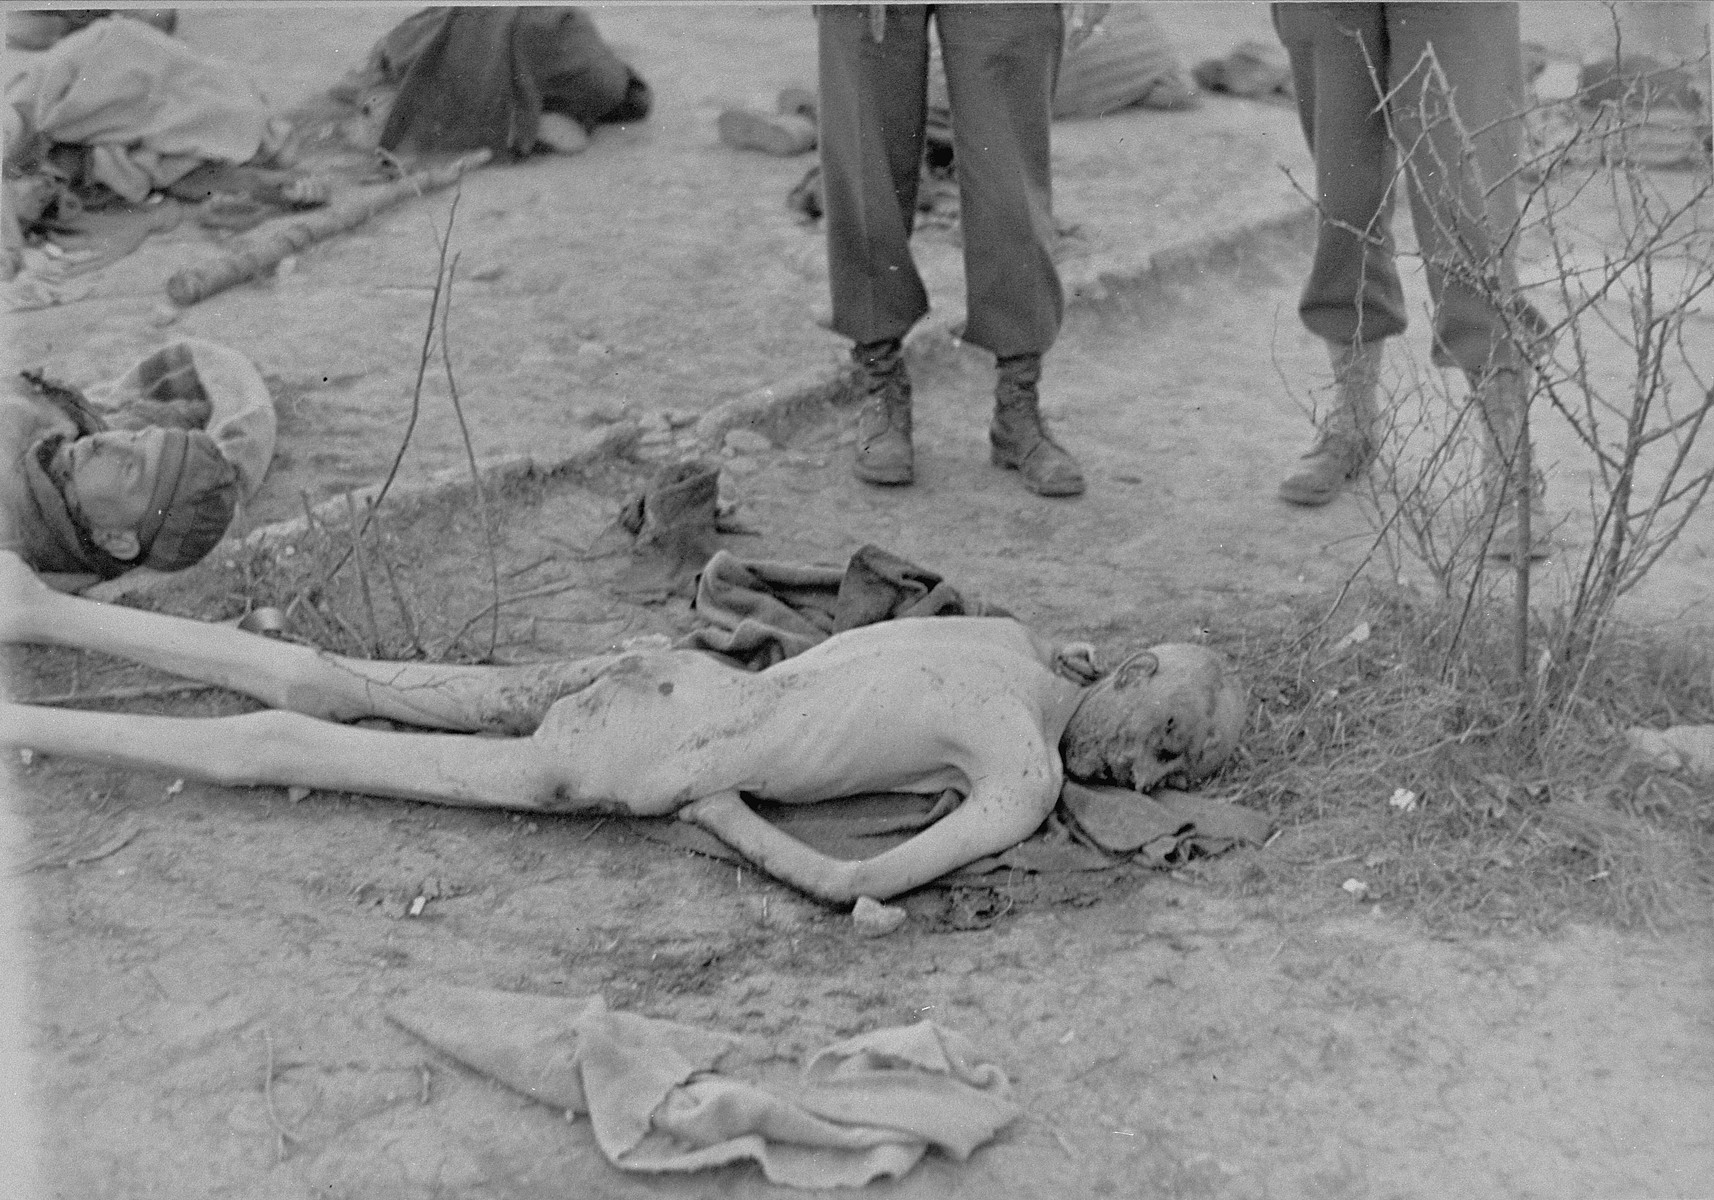 American soldiers view a naked, emaciated corpse in Ohrdruf.